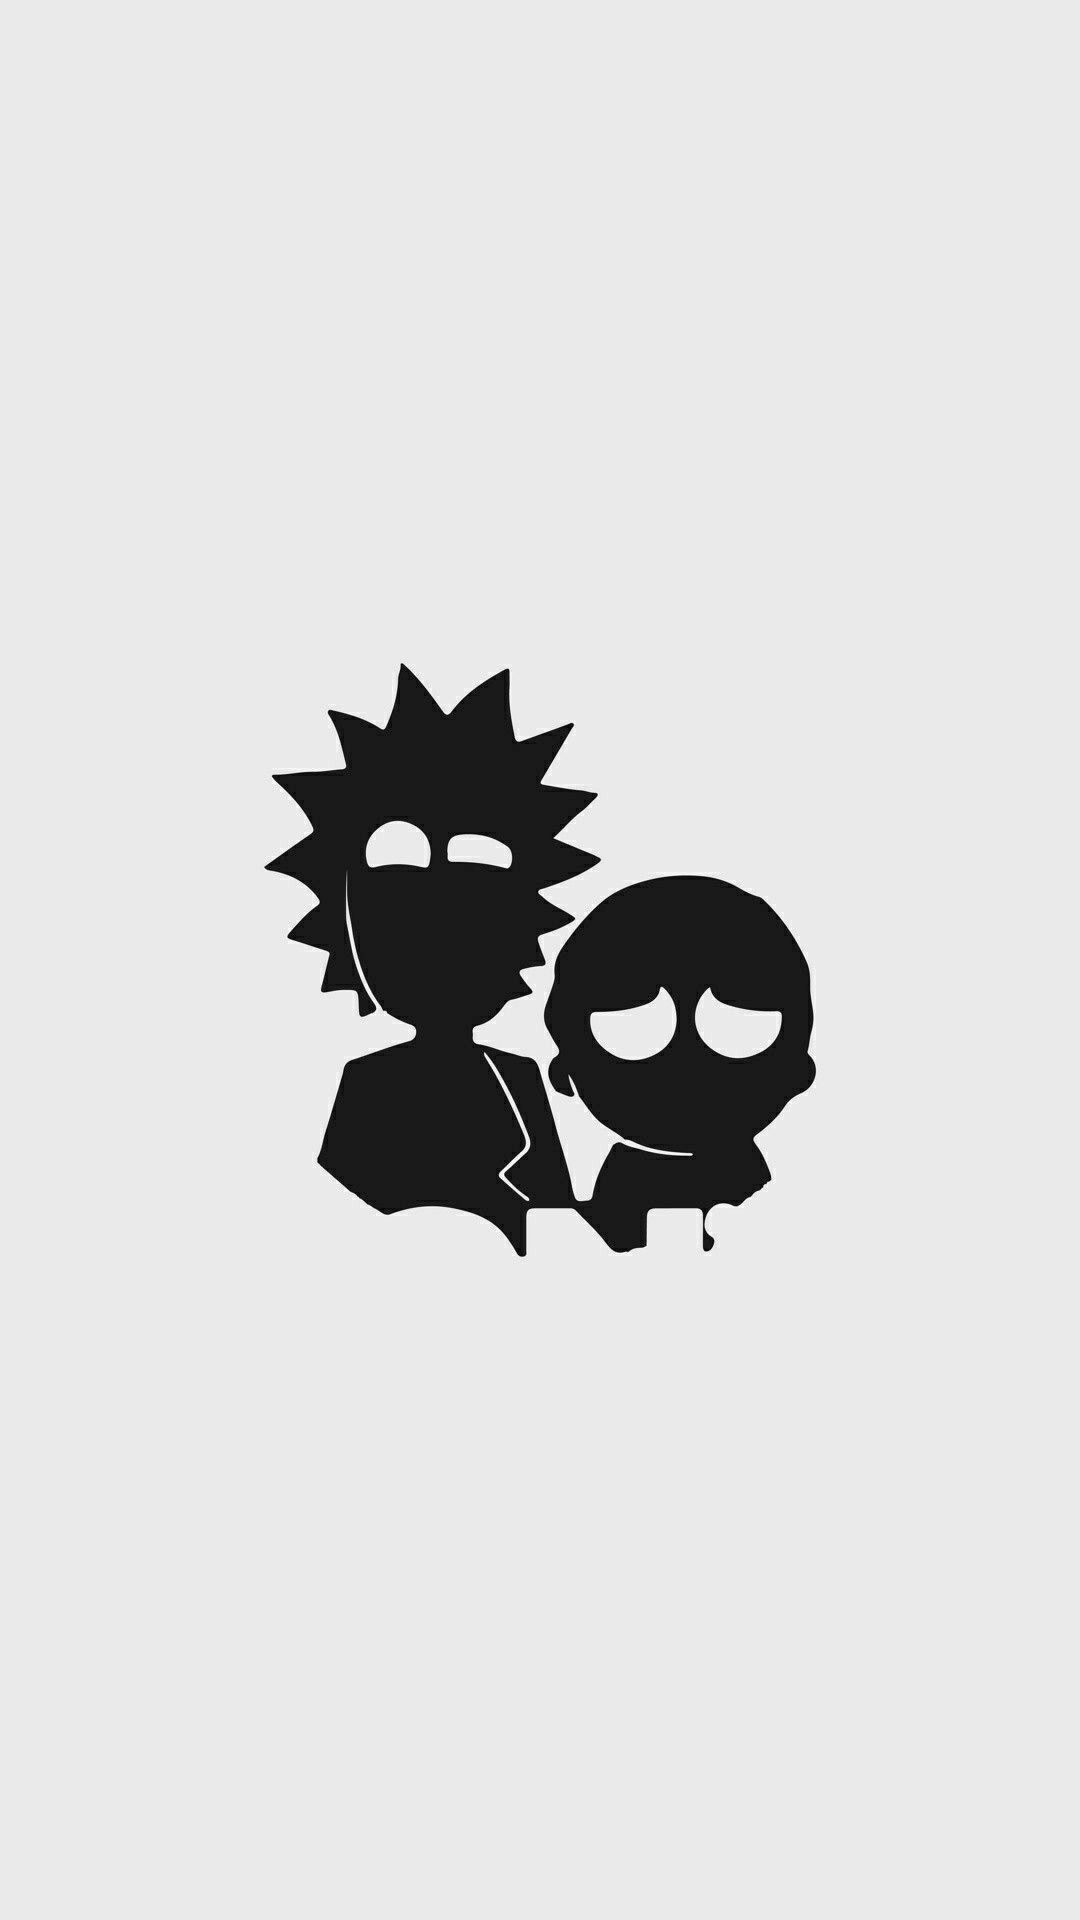 Rick And Morty Wallpaper Black And Grey Best Wallpaper Image In 2019. Rick and morty drawing, Rick and morty tattoo, Rick and morty poster